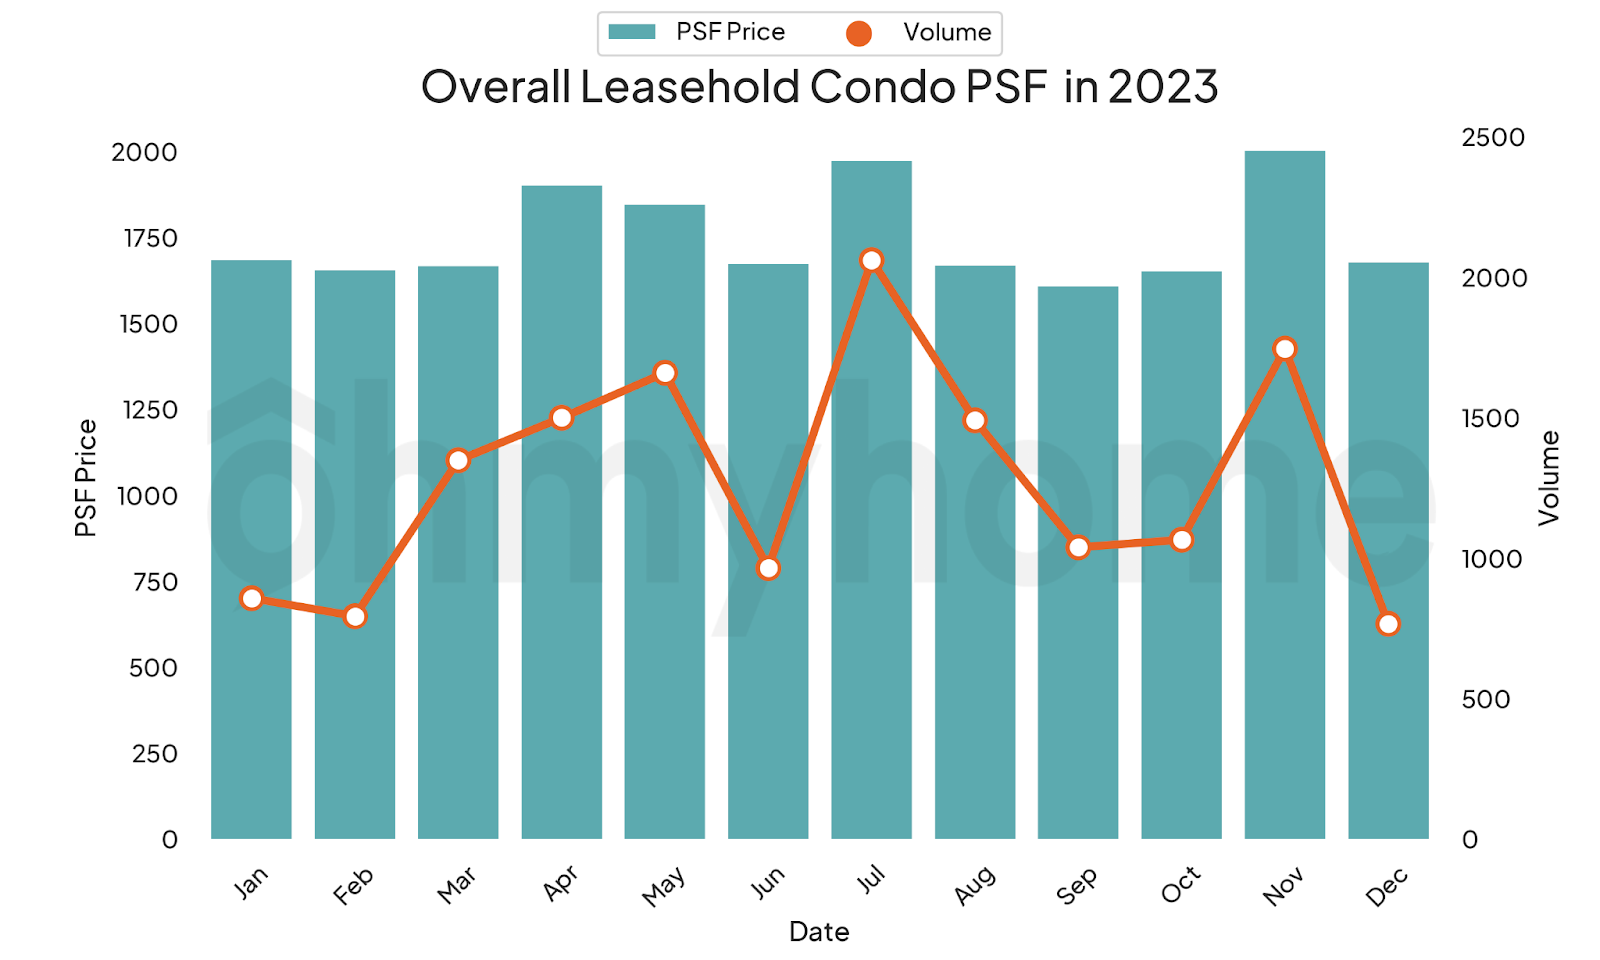 A bar and line chart showing the transaction volume and price movement of leasehold condos in Singapore in 2023